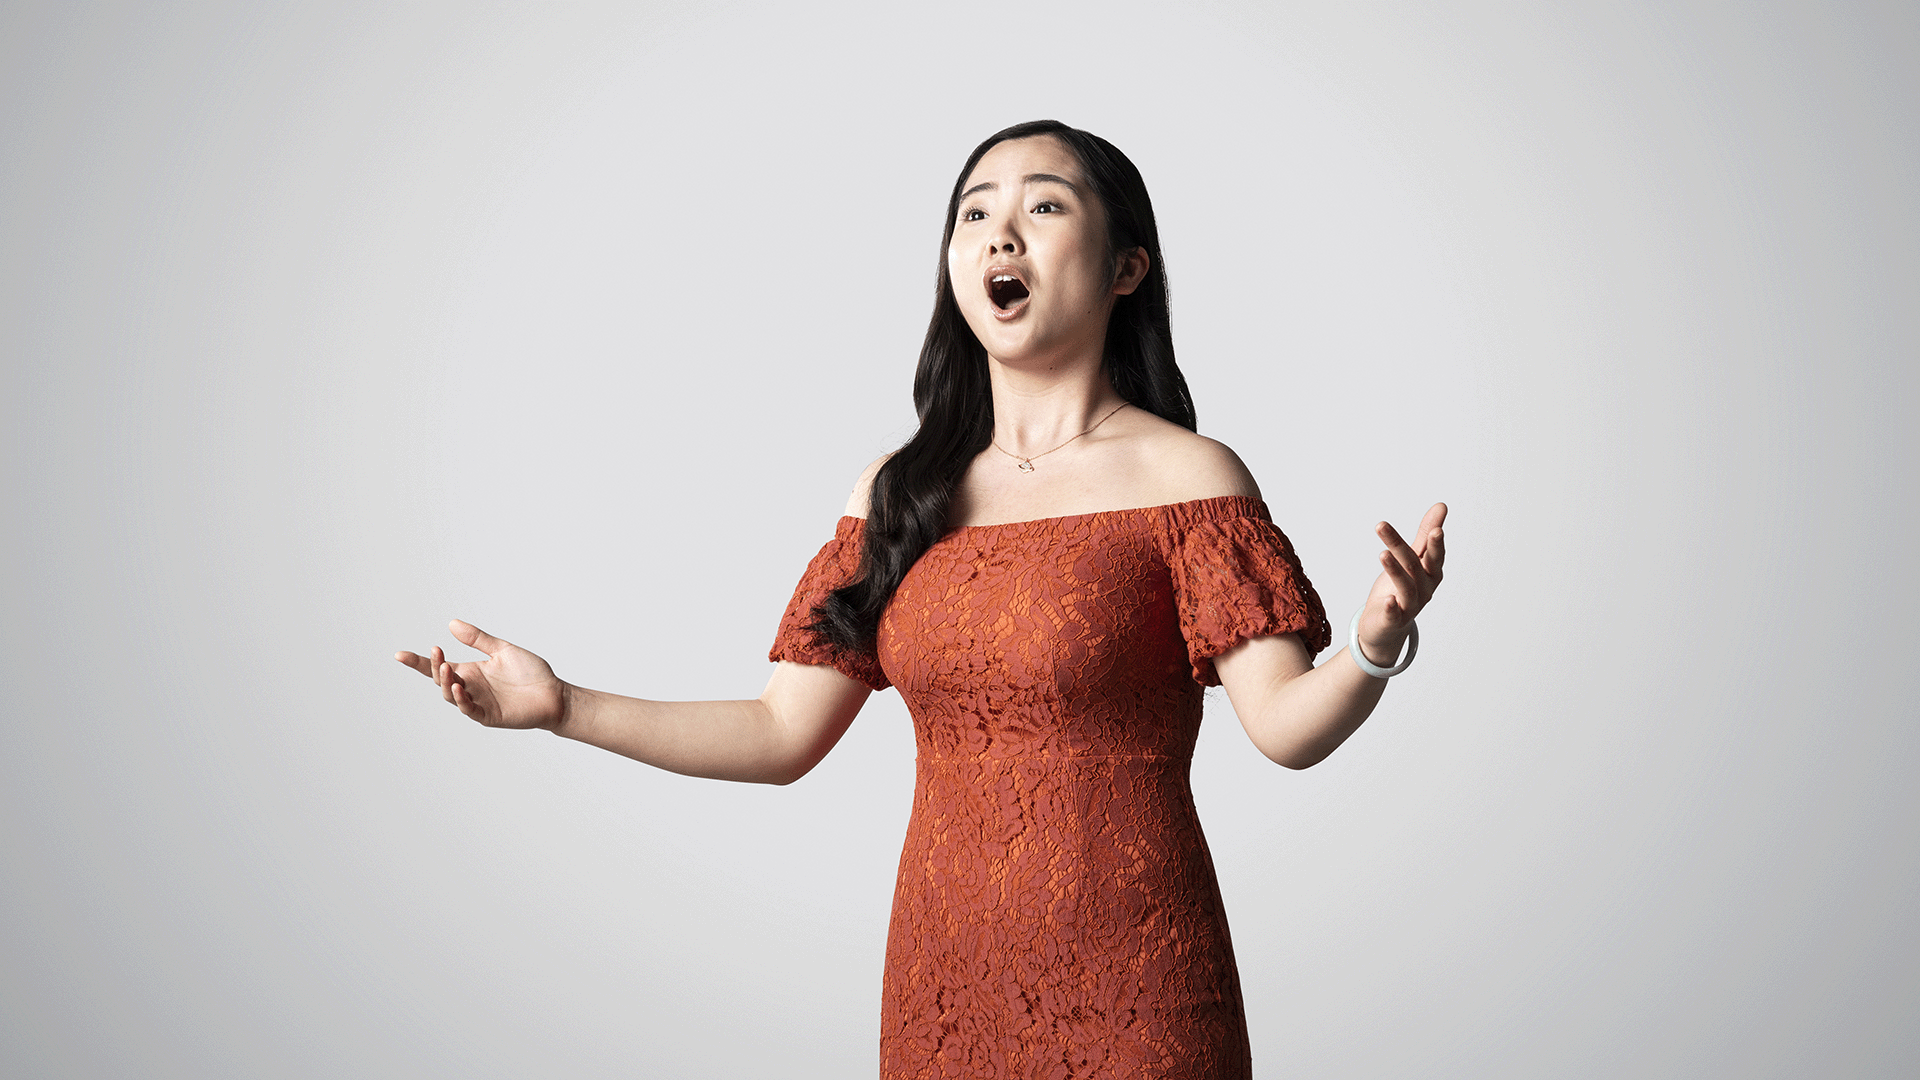 An RCM student in a red dress singing, against a grey background